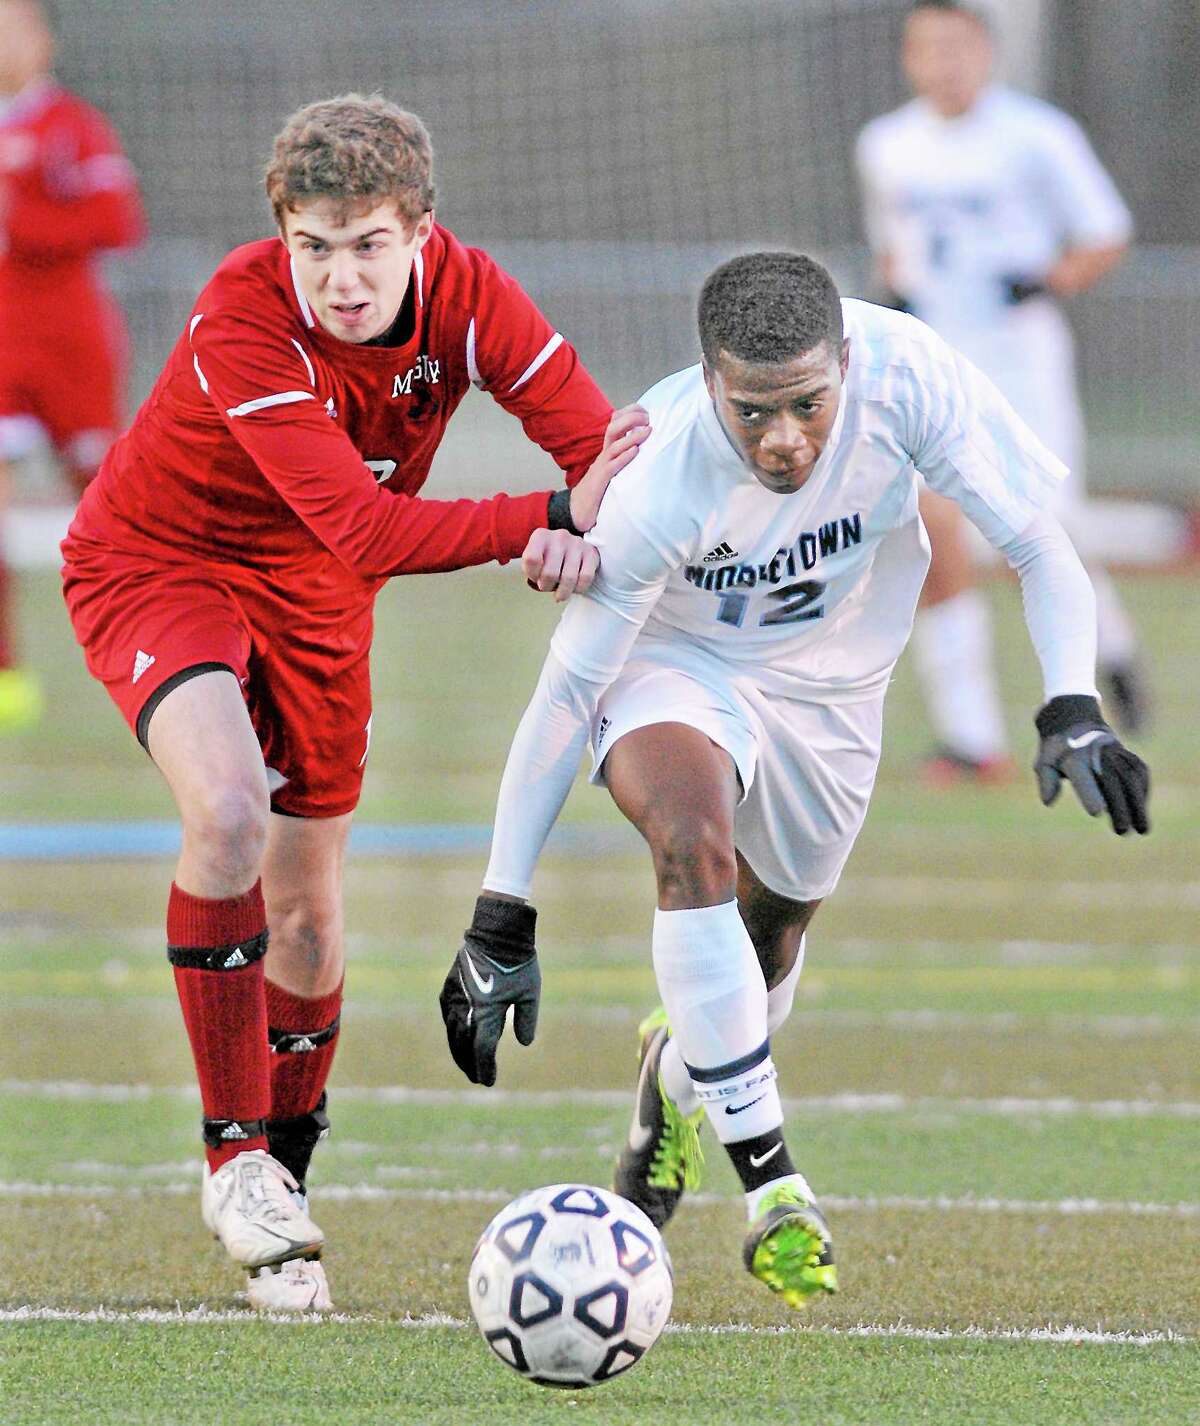 Middletown senior Lucas Saunders drives past Masuk junior Nicholas Zacchilli toward the Masuk goal Tuesday afternoon. Masuk defeated Middletown 2-0 in the CIAC Class L First Round.